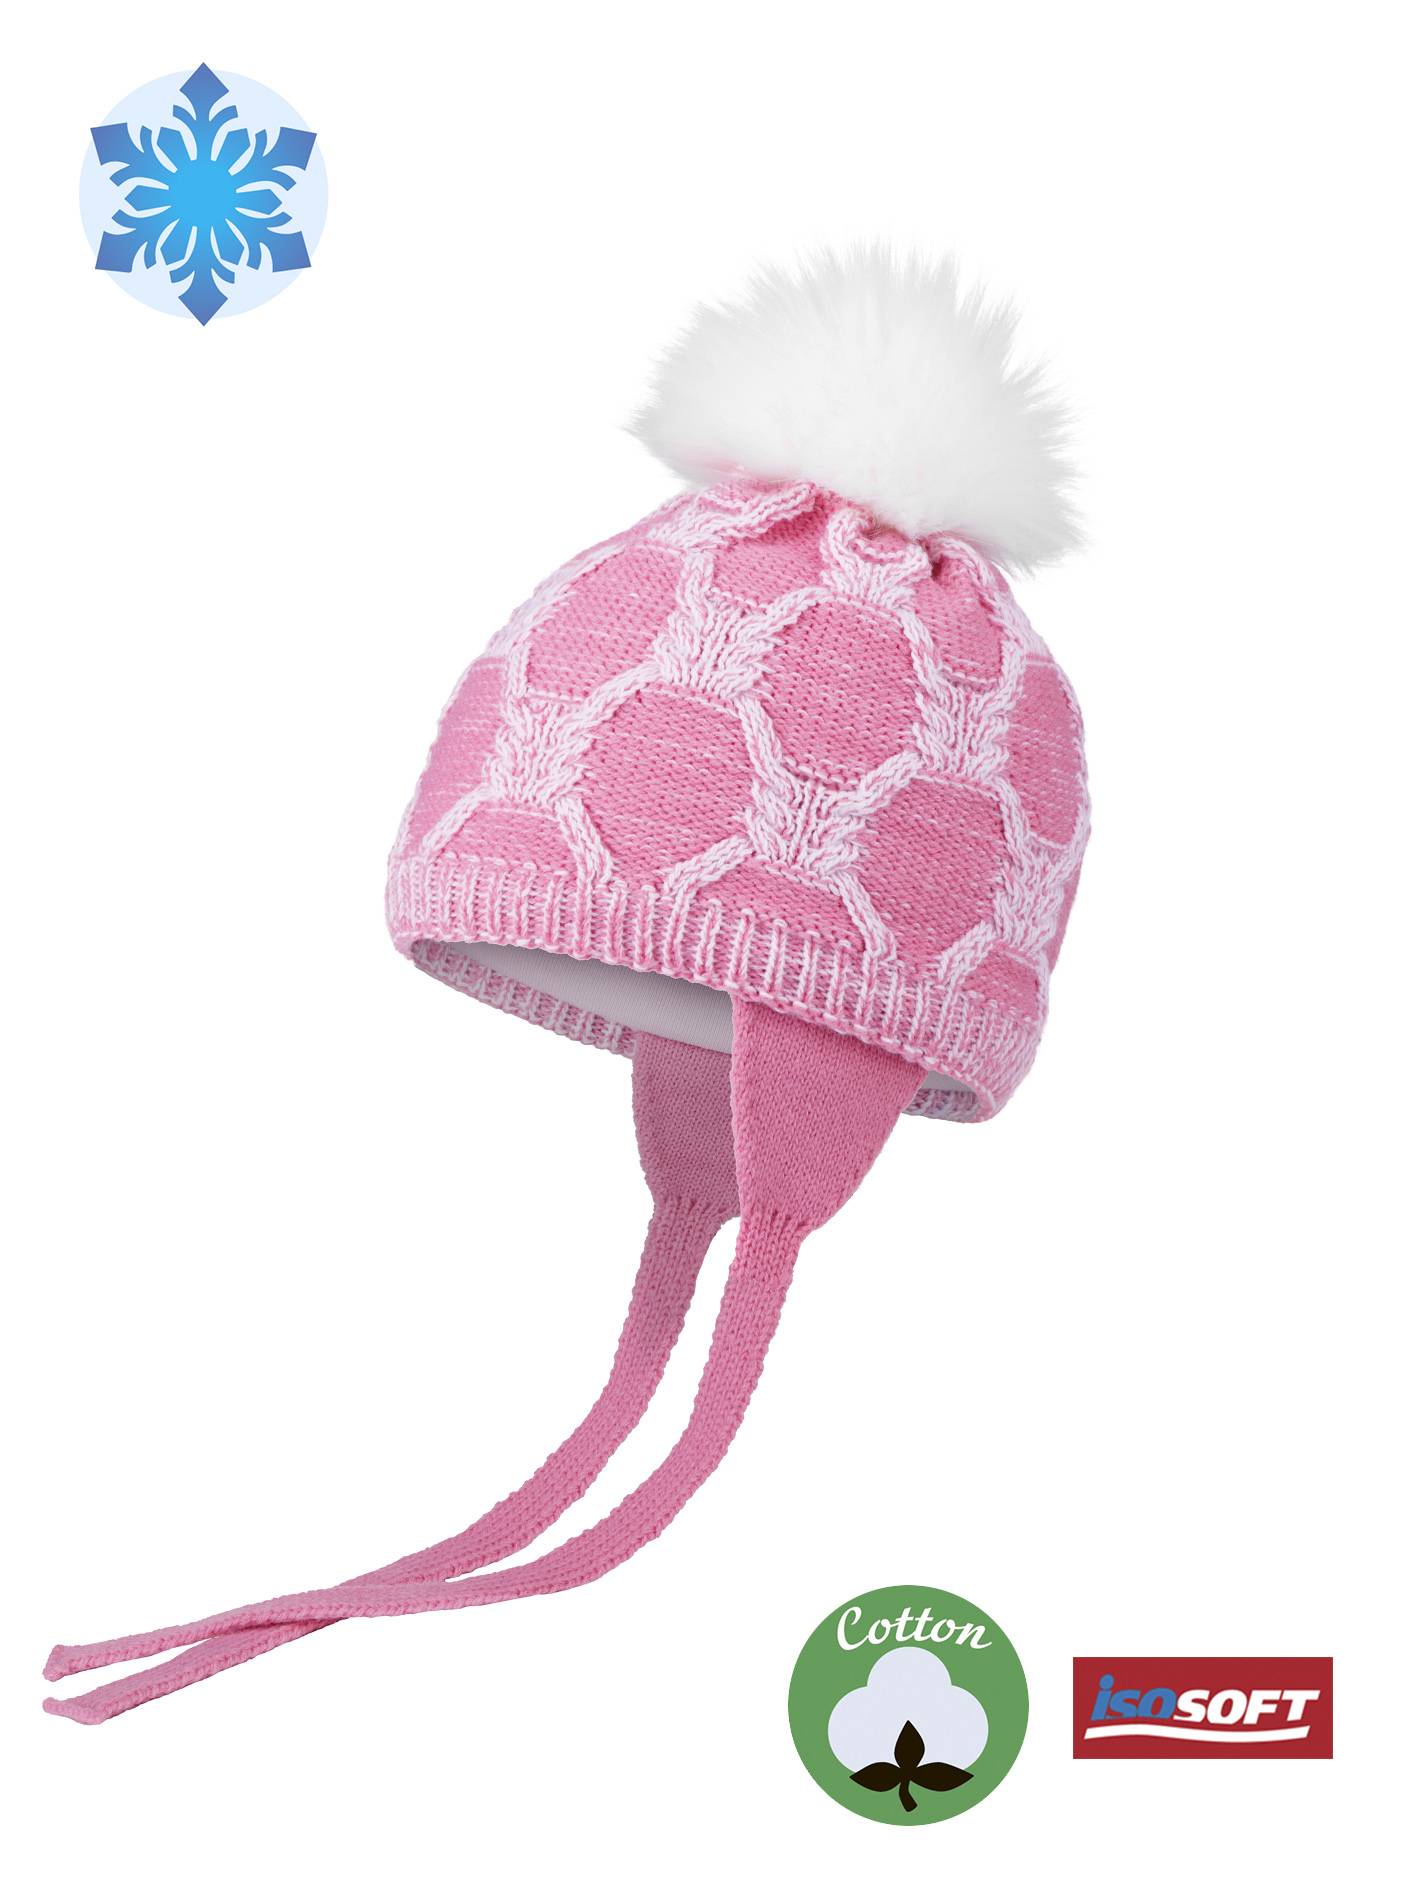 Conte/Esli Double knitted kids hat with insulation, cotton lining, fur pom-pom - For Girls (18С-31СП)